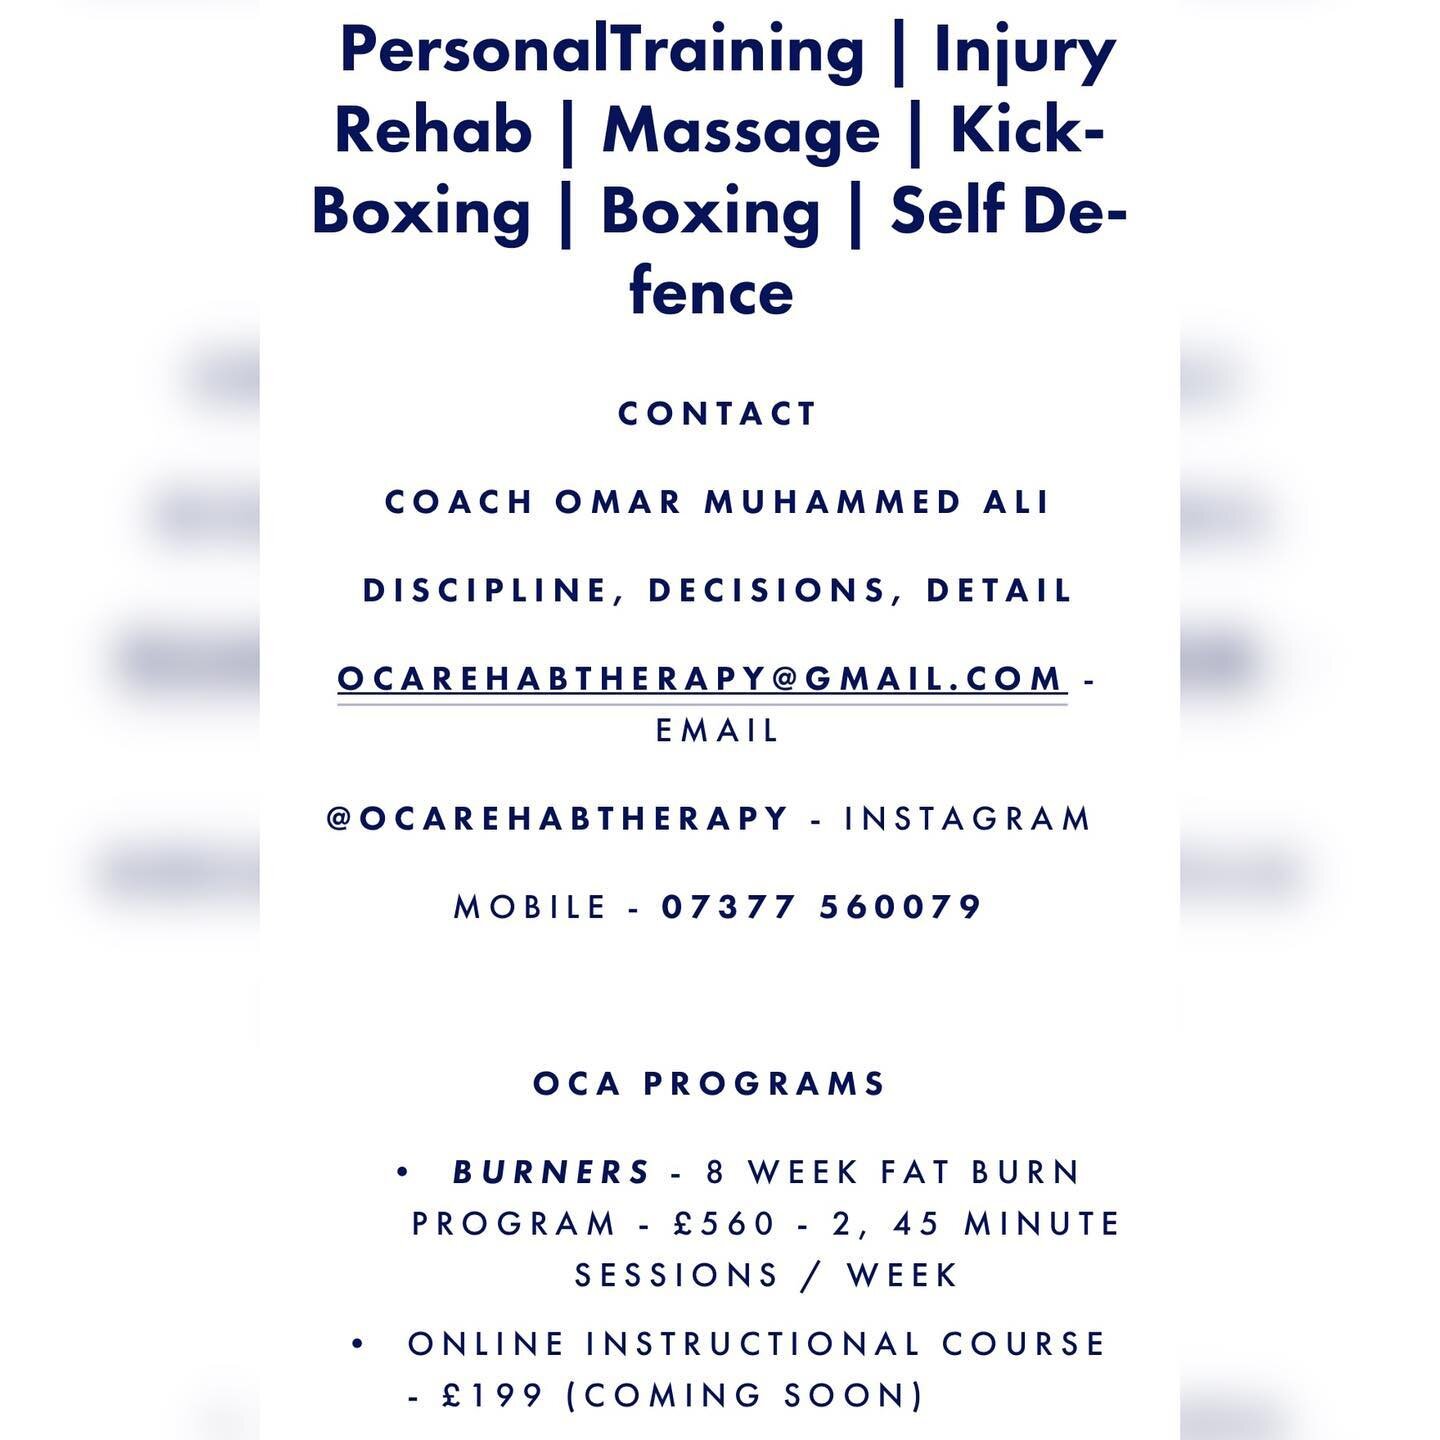 PersonalTraining /Kick Boxing / Boxing / Massage
ocarehabtherapy@gmail.com
@ocarehabtherapy - Instagram 
Mobile - 07377 560079

Programs 

* Burners - 8 week Fat Burn Program - &pound;560 - 2, 45min sessions / week 
* Online Instructional Course - &p